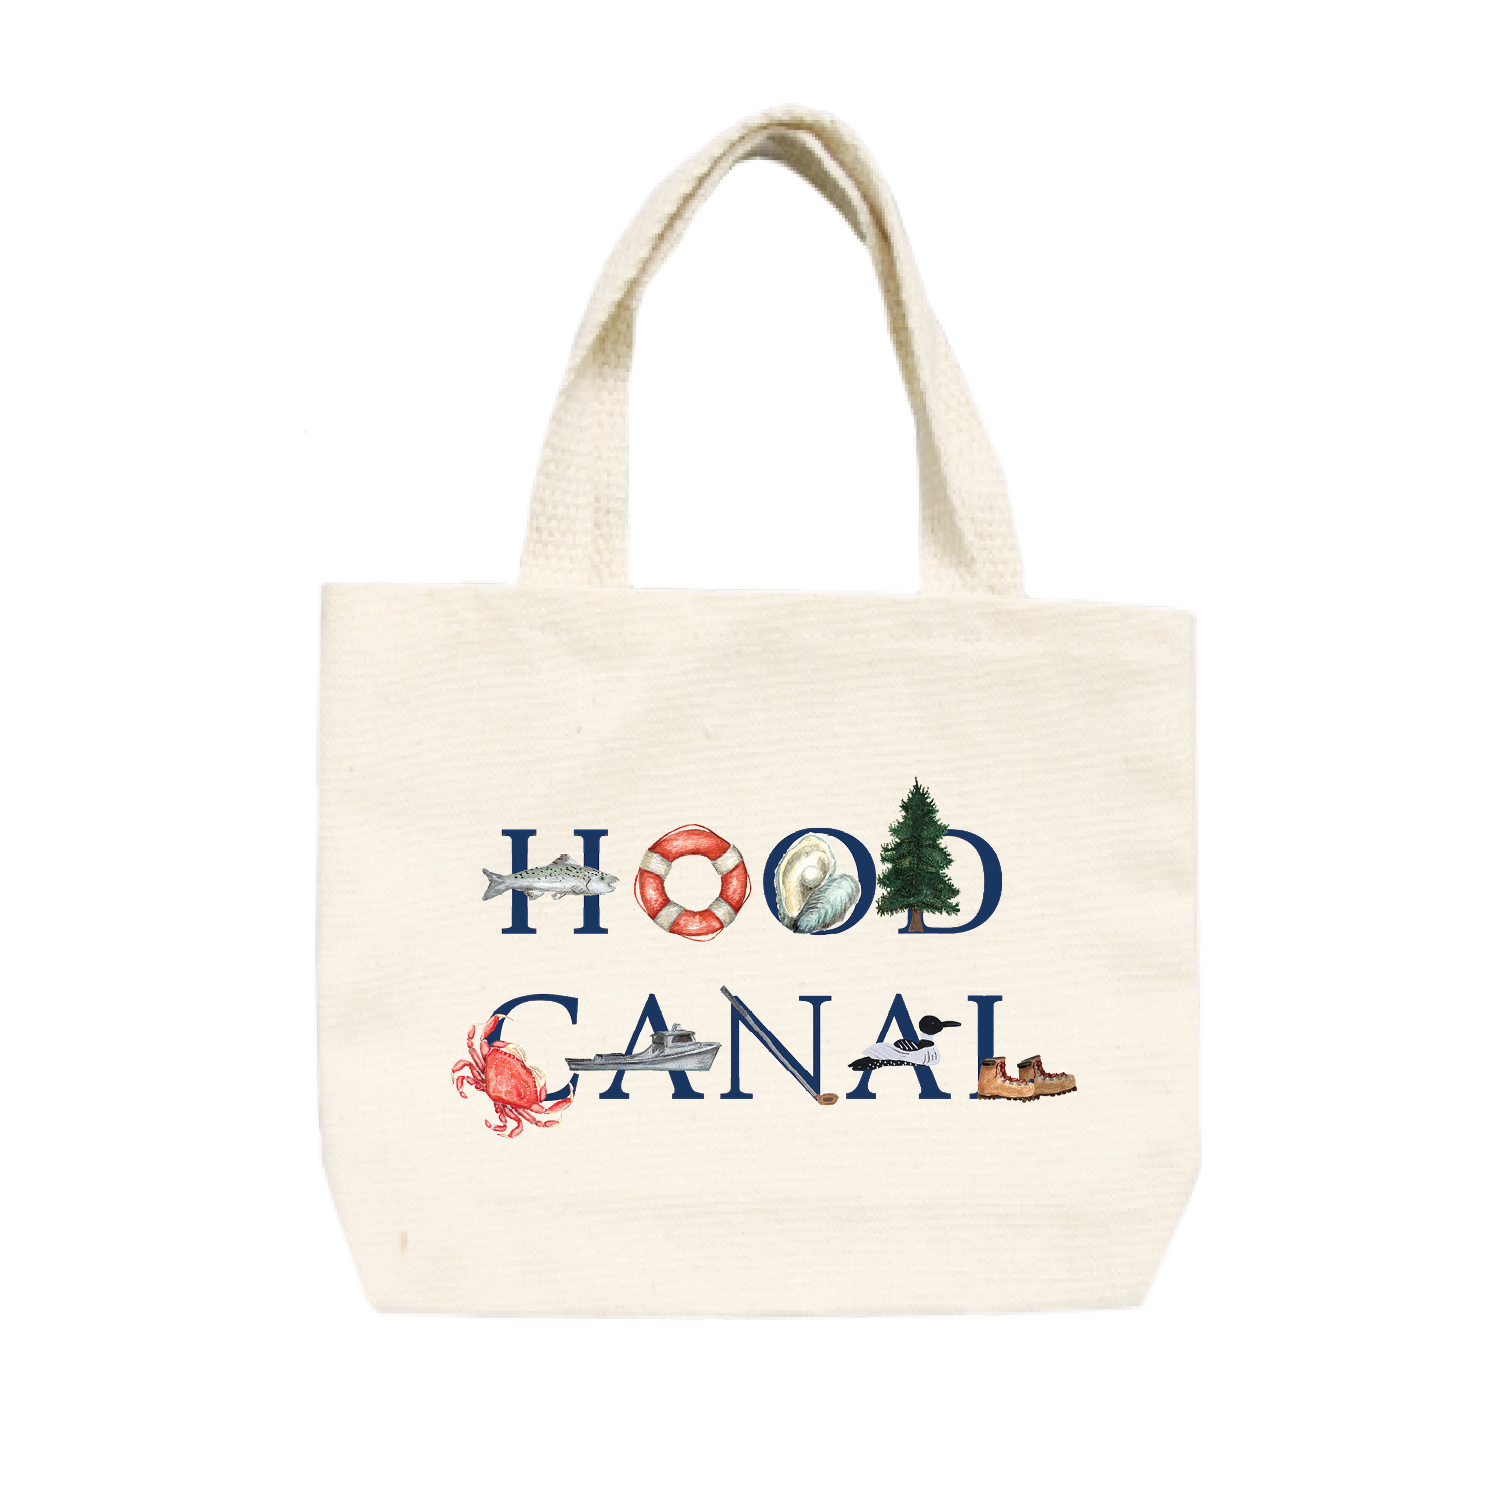 hood canal small tote